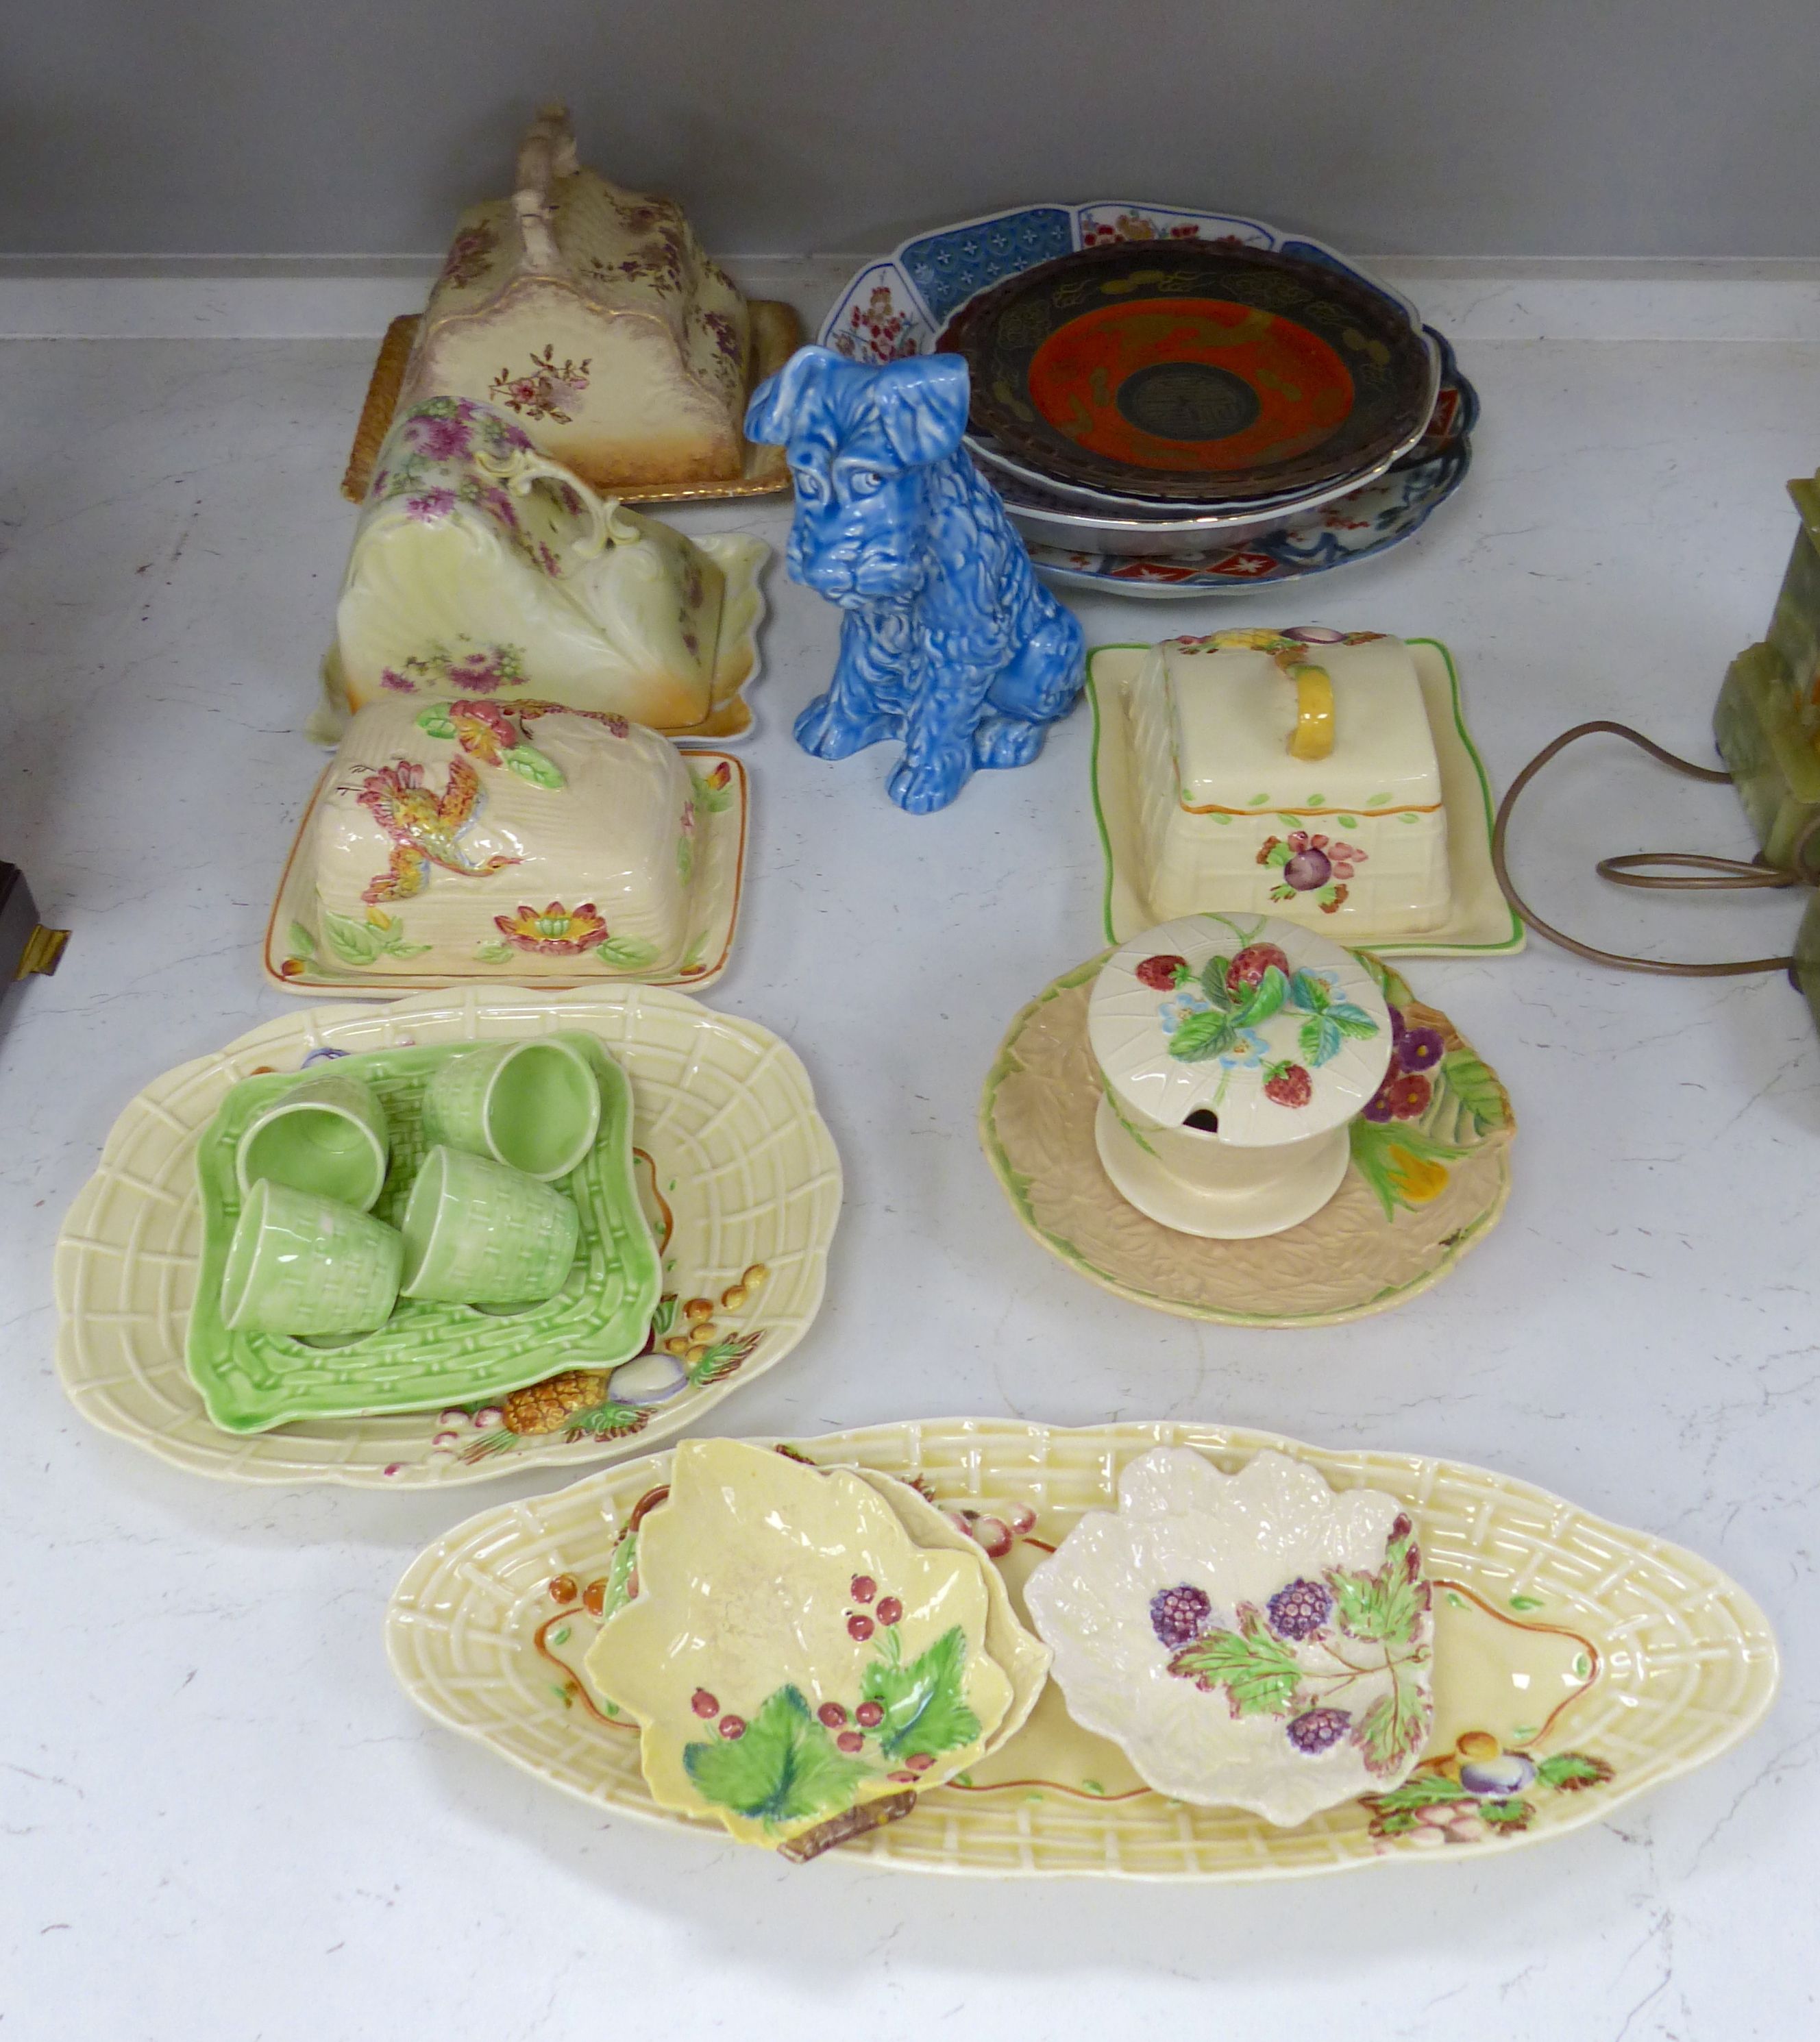 Miscellaneous china, including three cheese dishes, a Beswick preserve pot and cover, Carlton Ware and Imari dishes, etc.